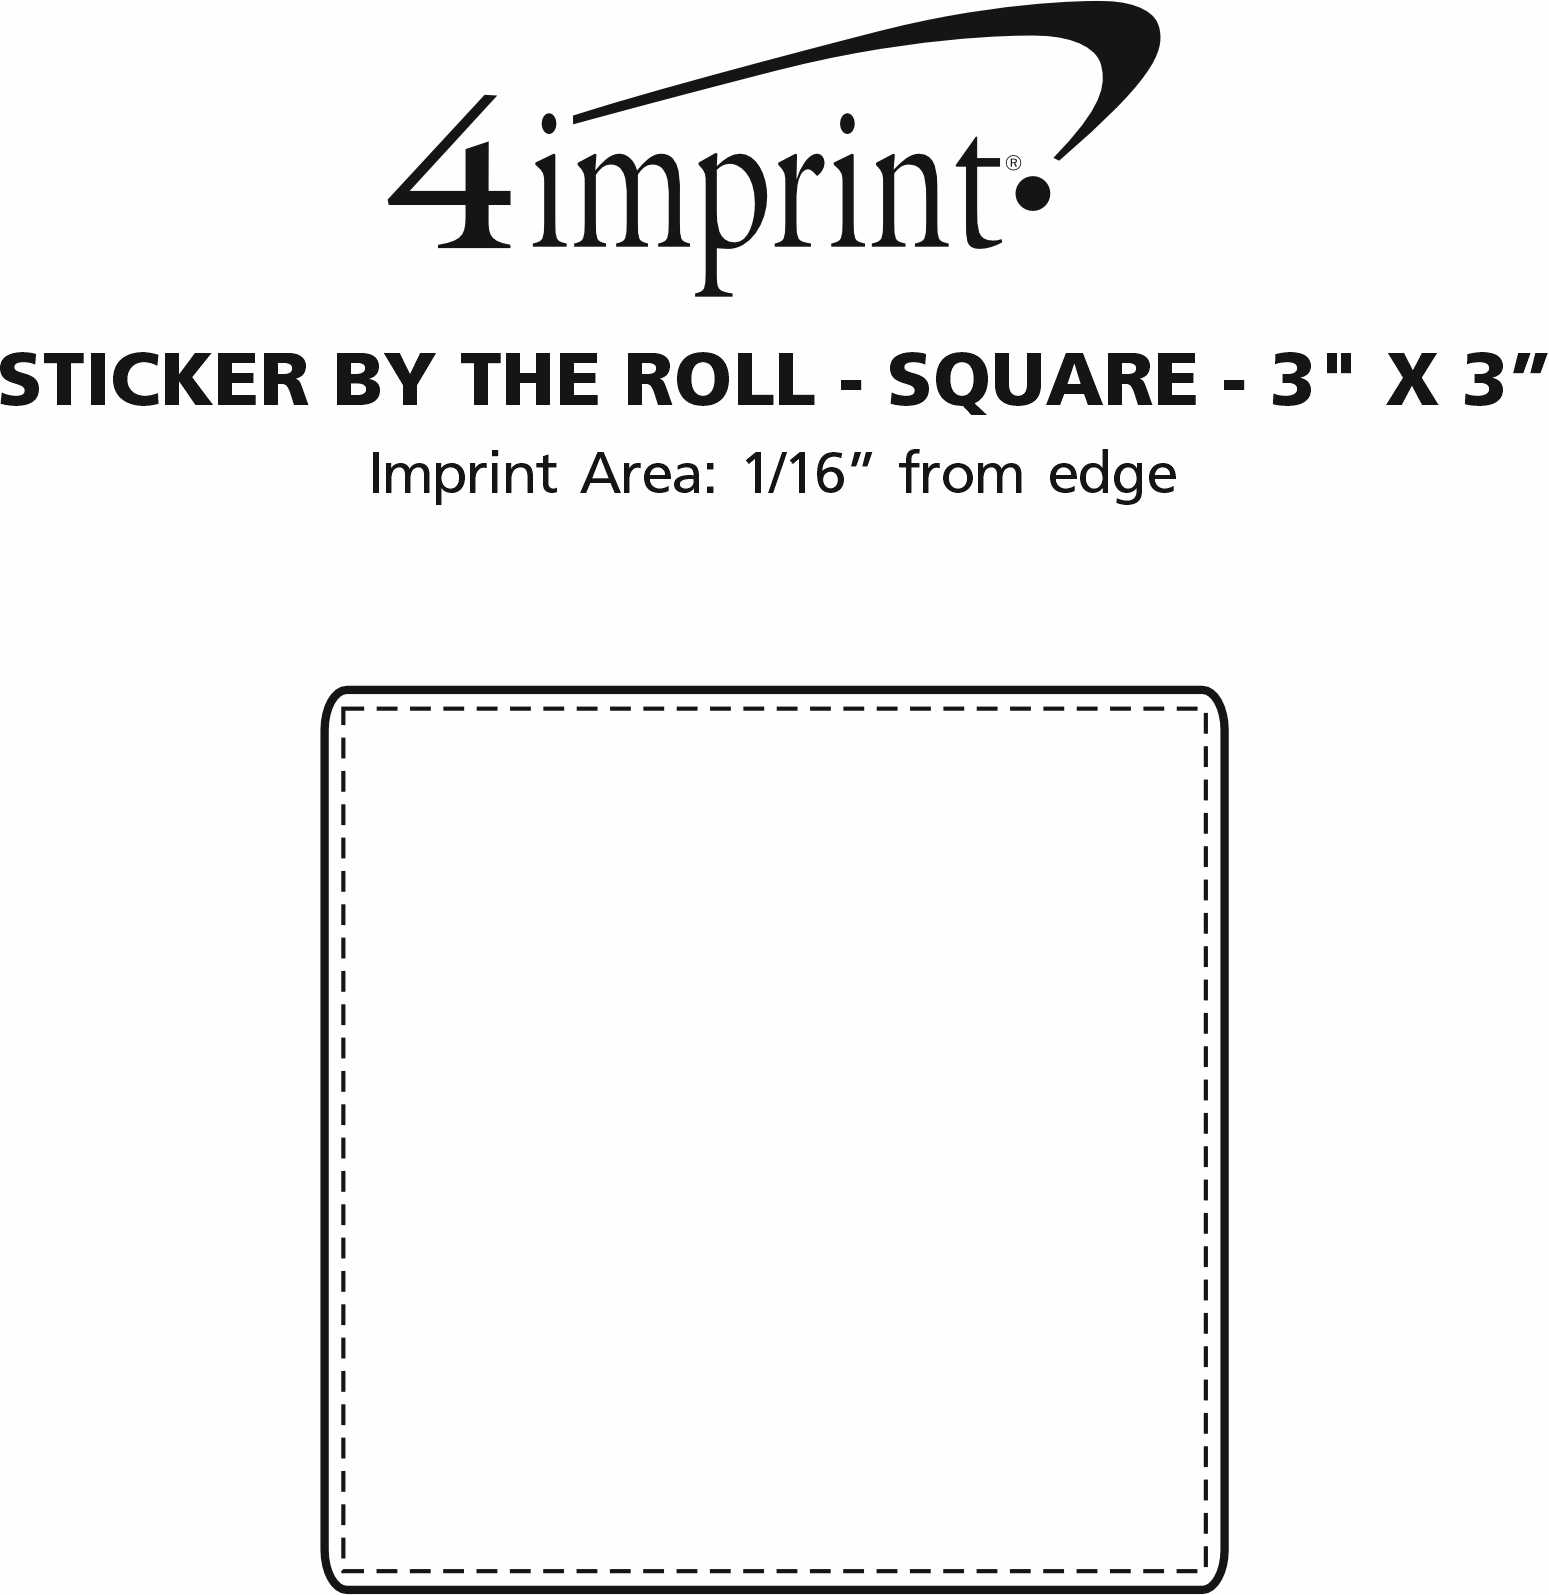 Imprint Area of Sticker by the Roll - Square - 3" x 3"